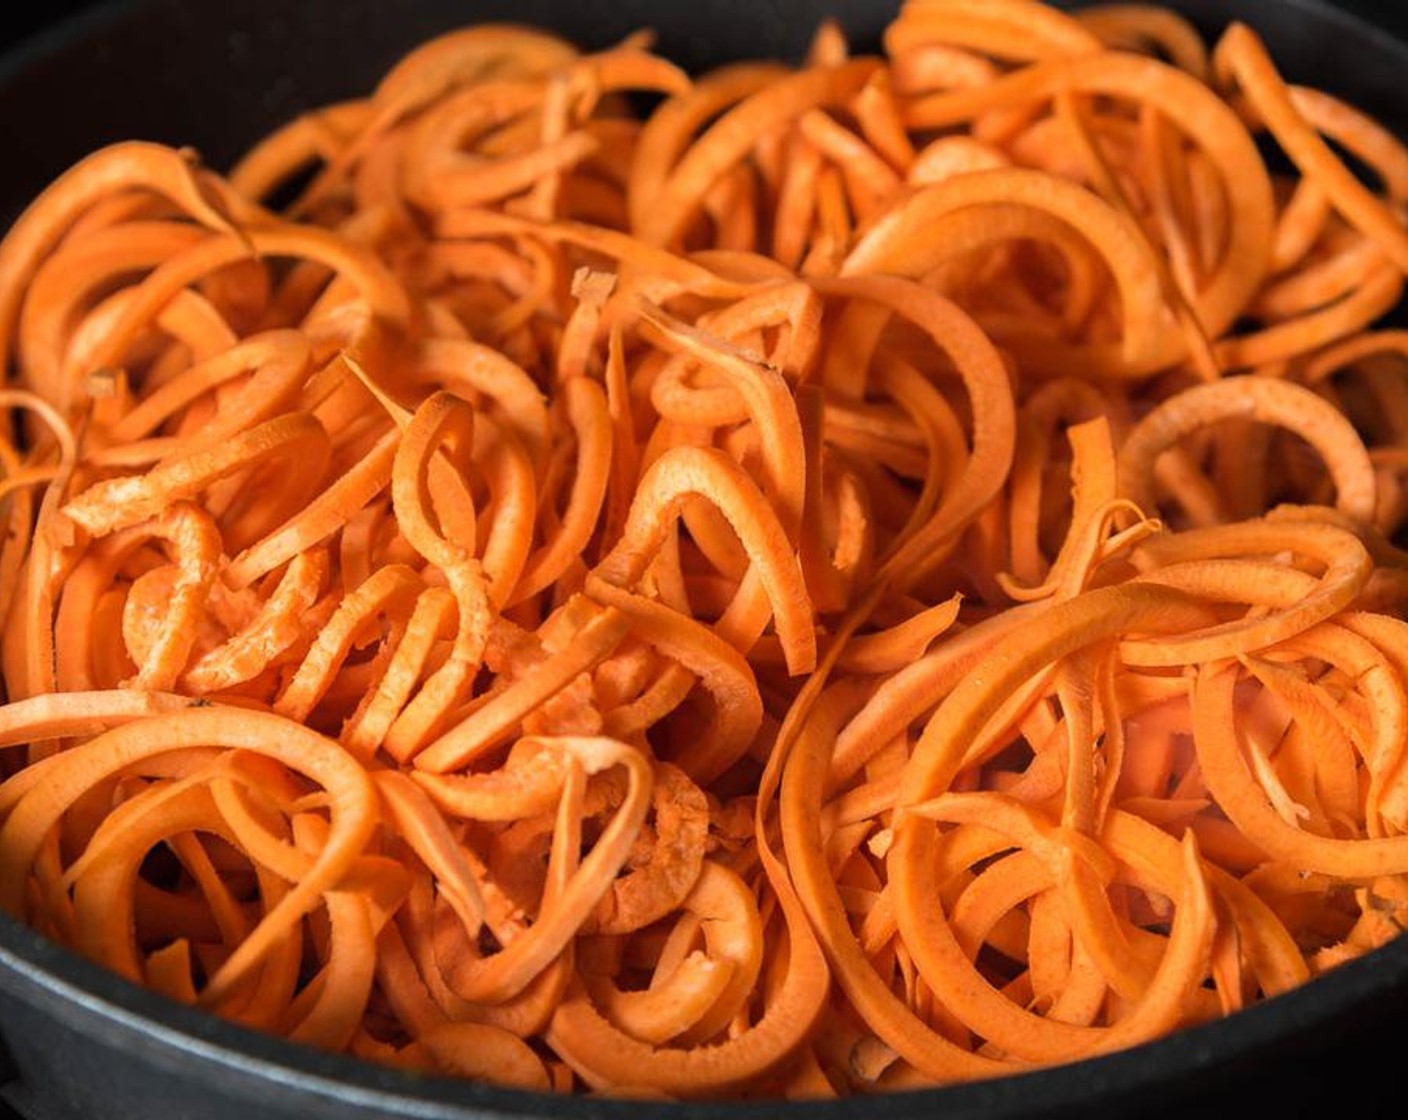 step 5 Cook potato noodles: Cut Sweet Potatoes (3) into noodles using a spiralizer. If you do not have a spiralizer, use a julienne peeler or mandoline to cut sweet potatoes into strips.